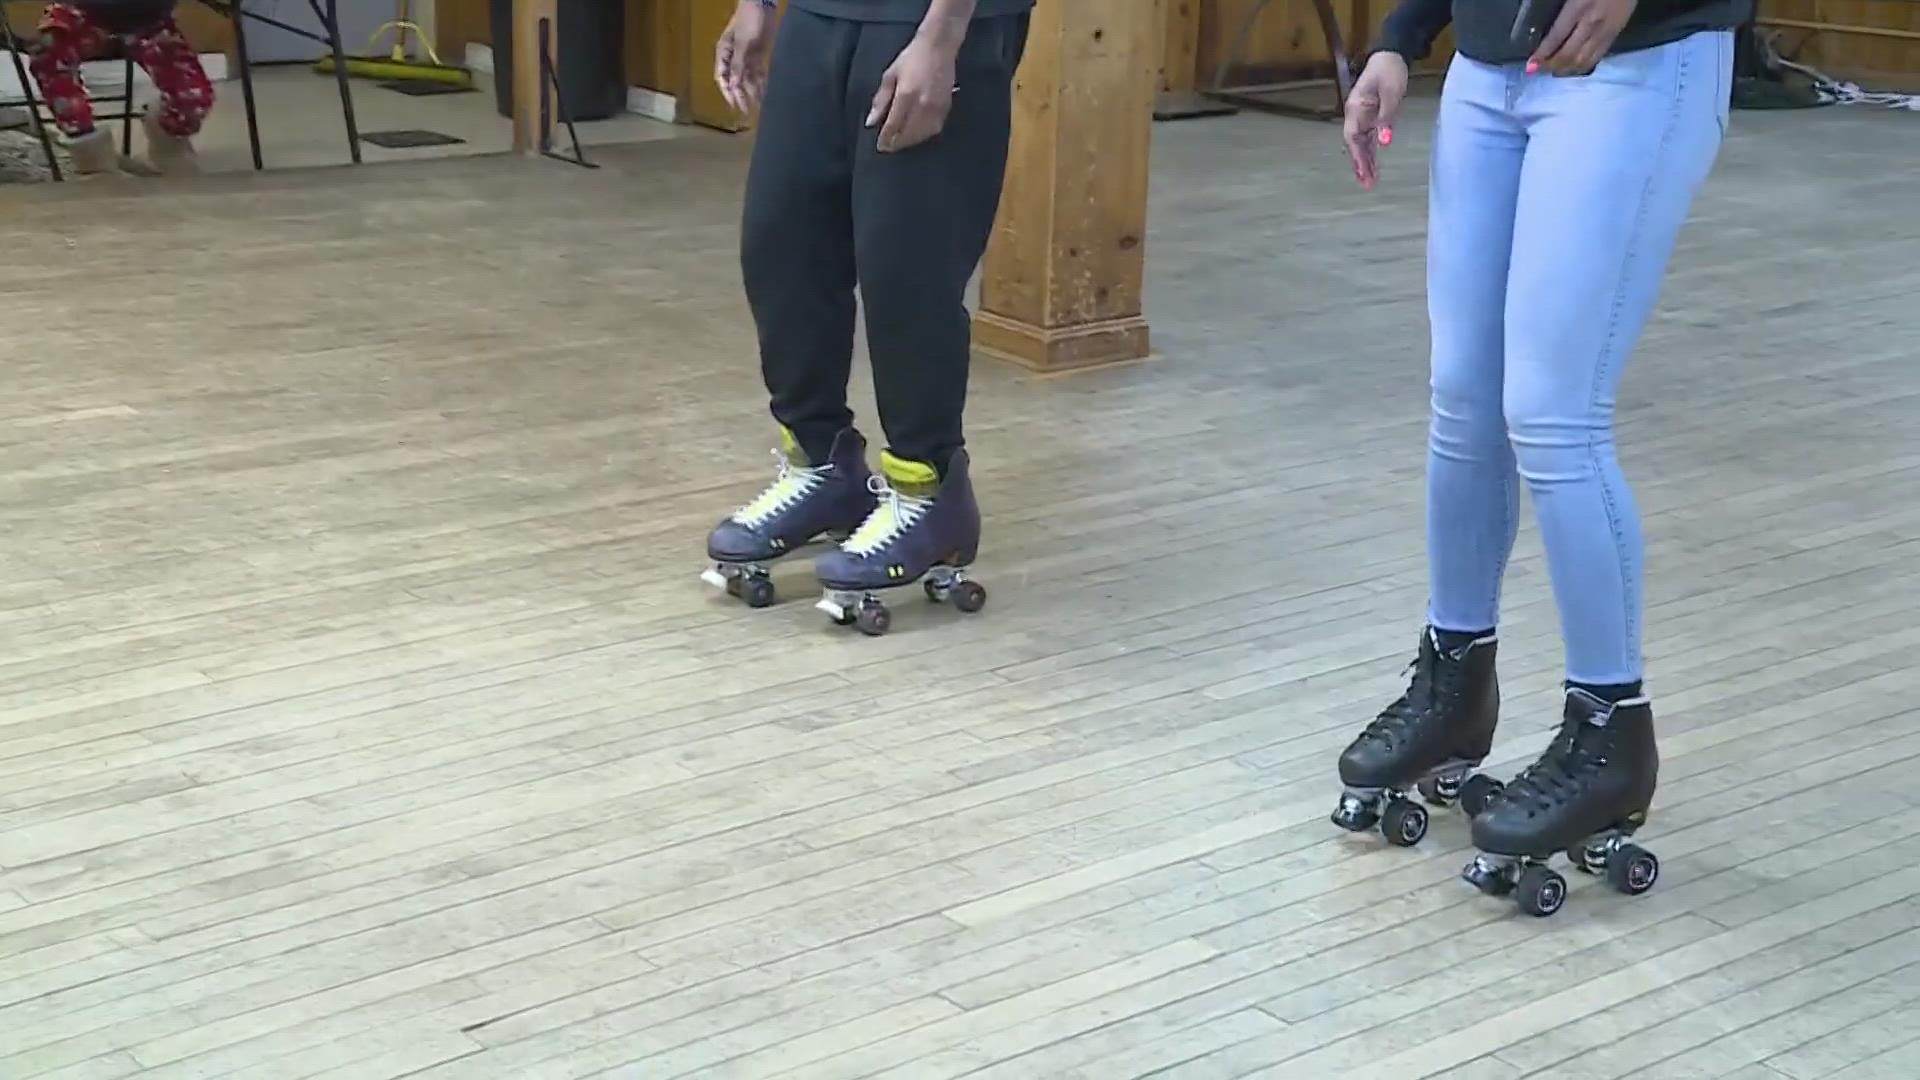 3News' Kierra Cotton visited Showtime's Skate Studio in South Euclid to get a lesson on roller skating.